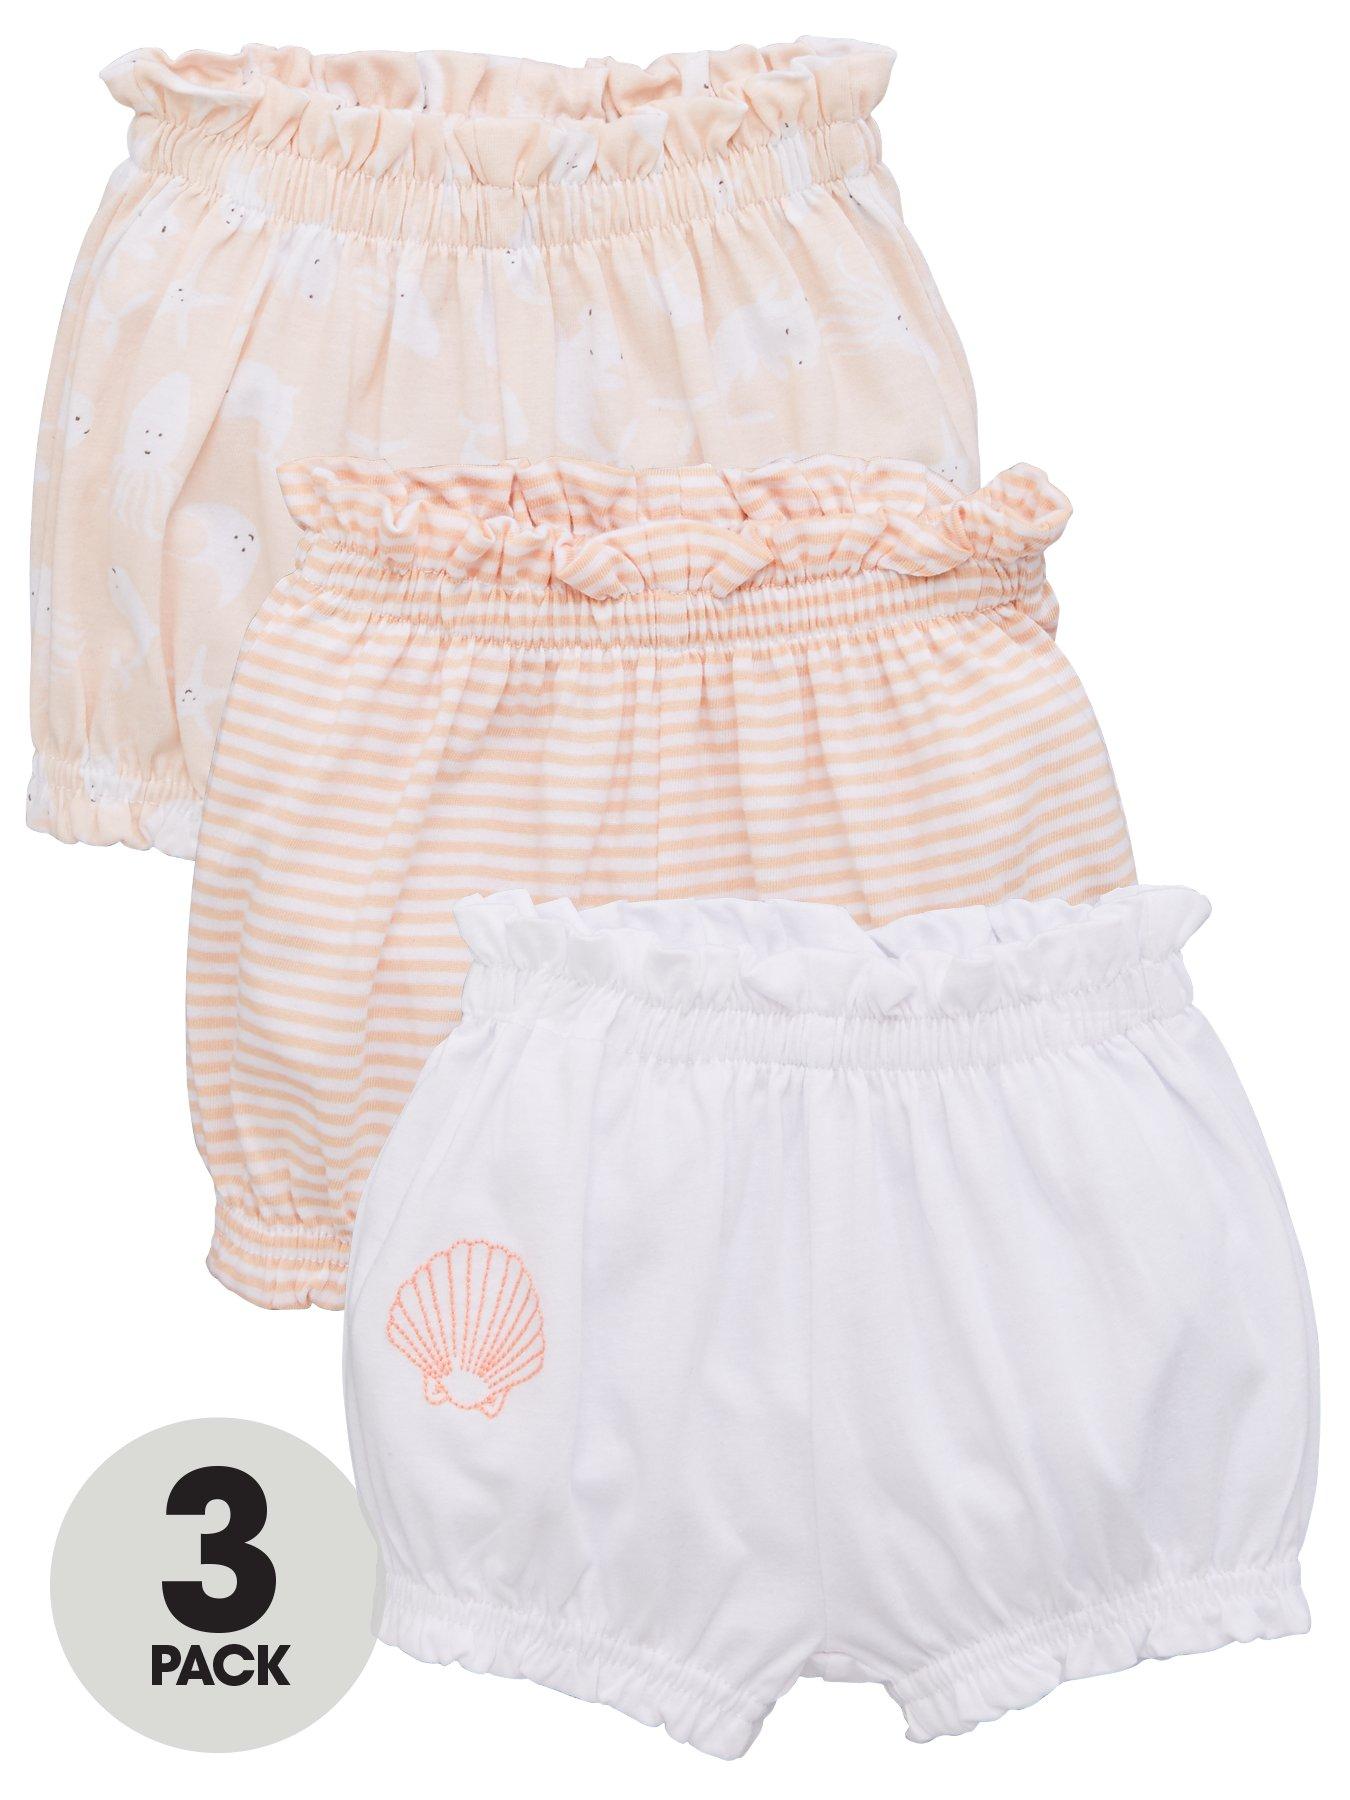 baby summer clothes sale uk